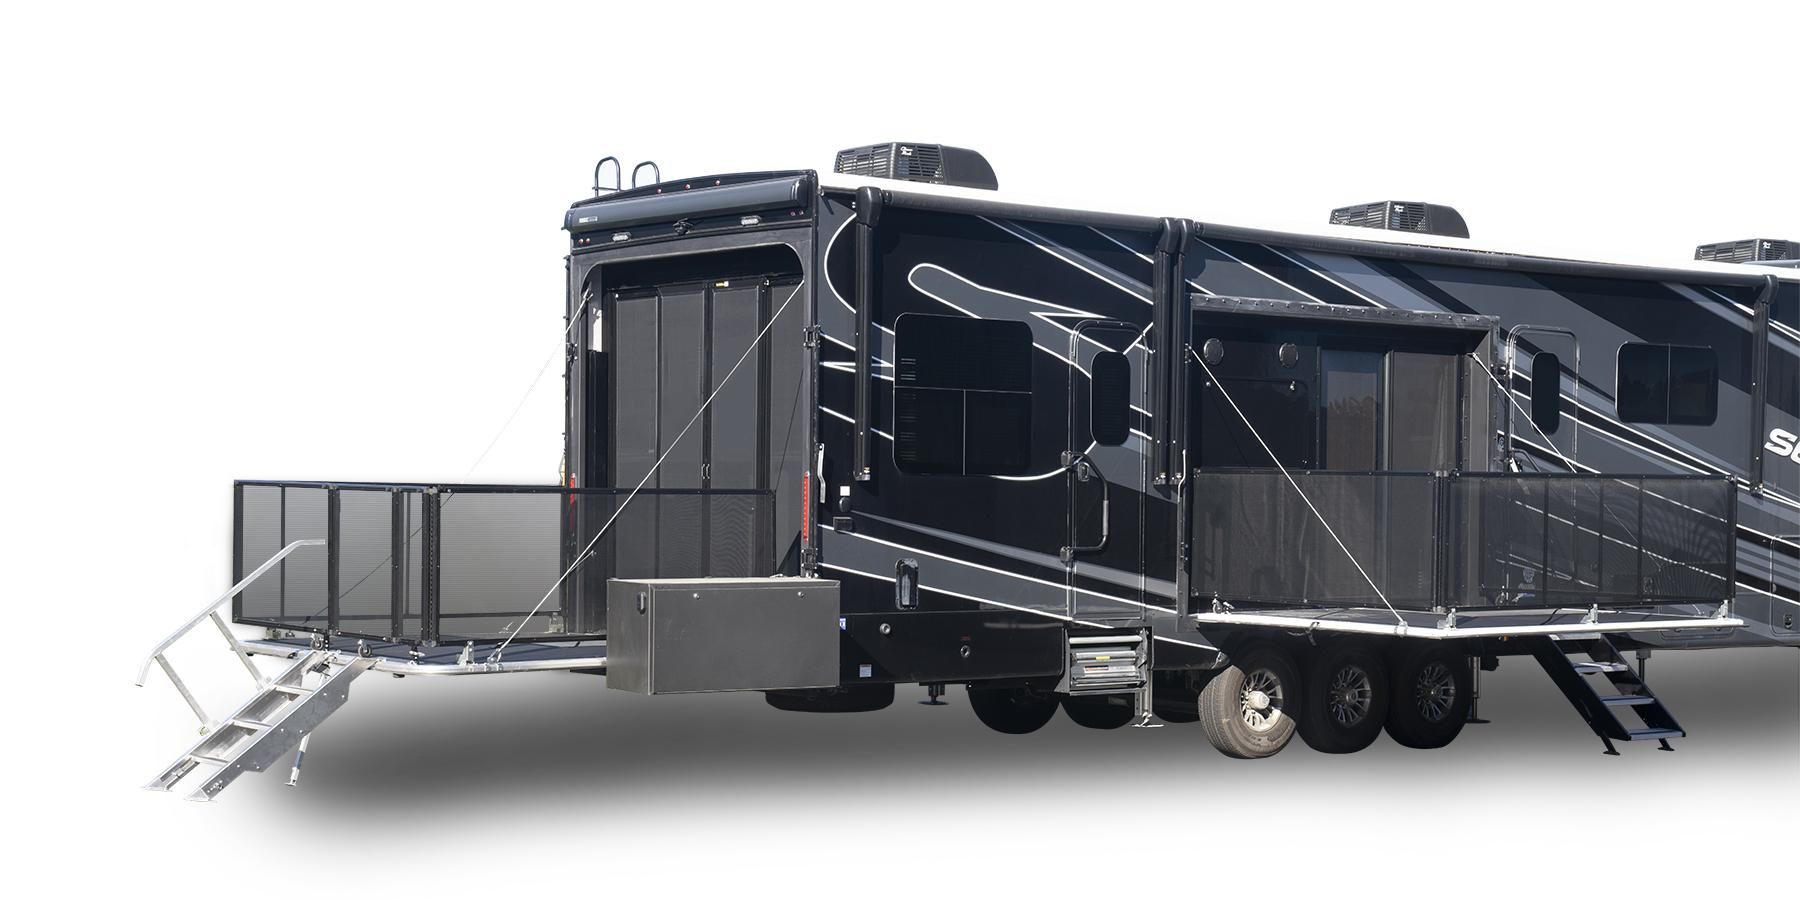 jayco 2022 luxury series toy hauler with back and side porch extended.